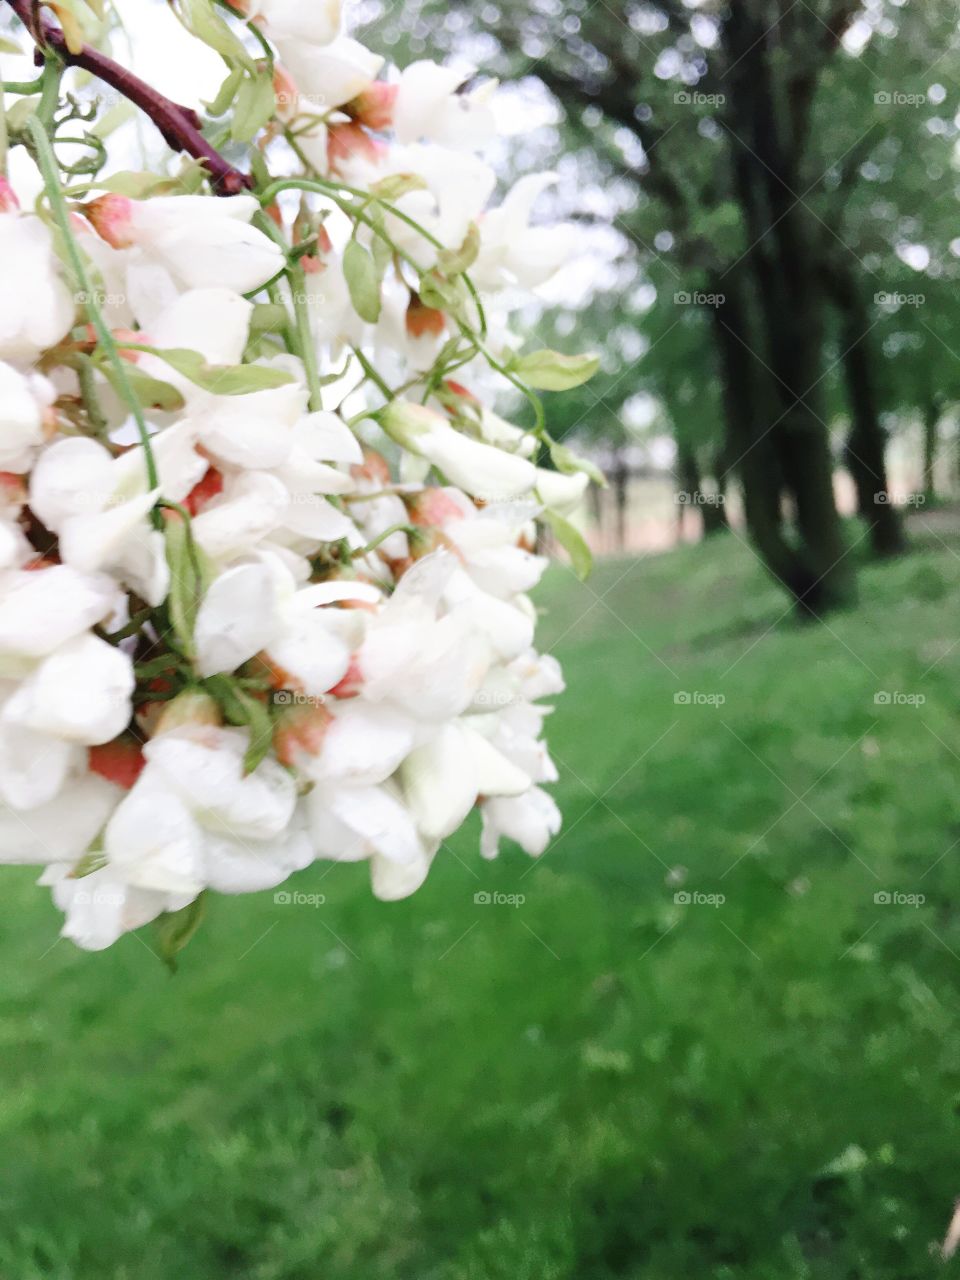 A cluster of White Locust tree blossoms hangs down against a backdrop of blurred trees on a grassy hill